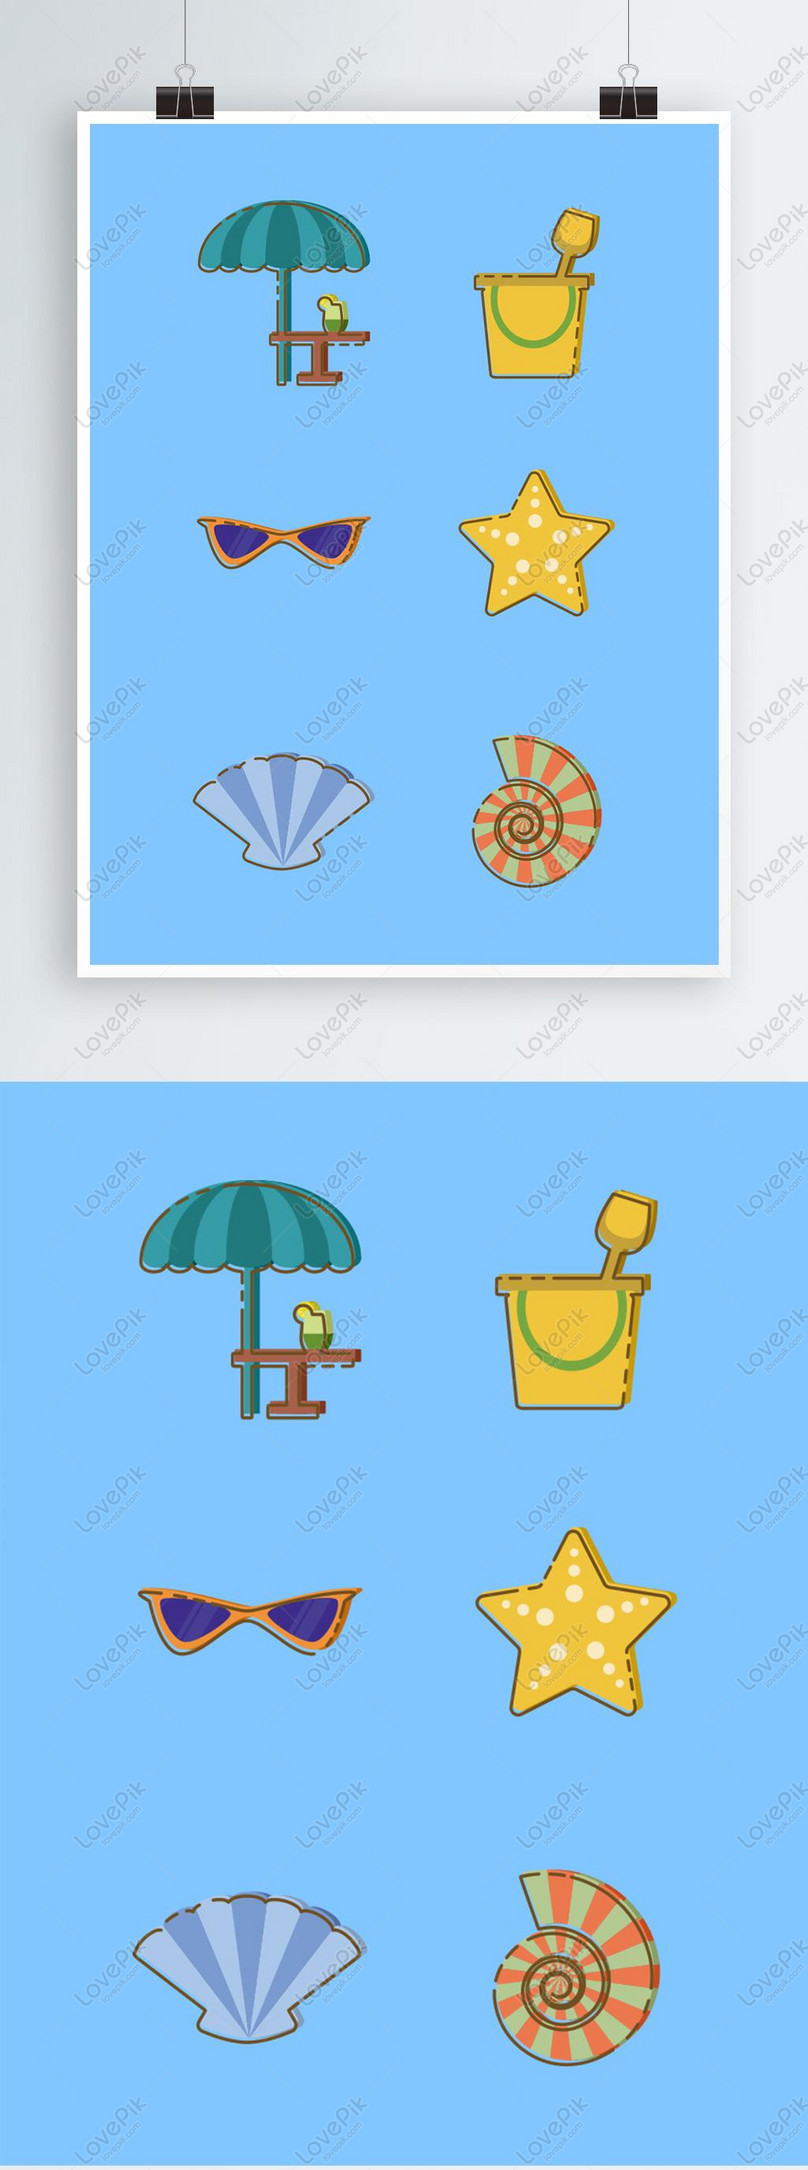 Flat Simple Cartoon Mbe Seaside Beach Item Elements PNG Hd Transparent  Image AI images free download_2805 × 1024 px - Lovepik